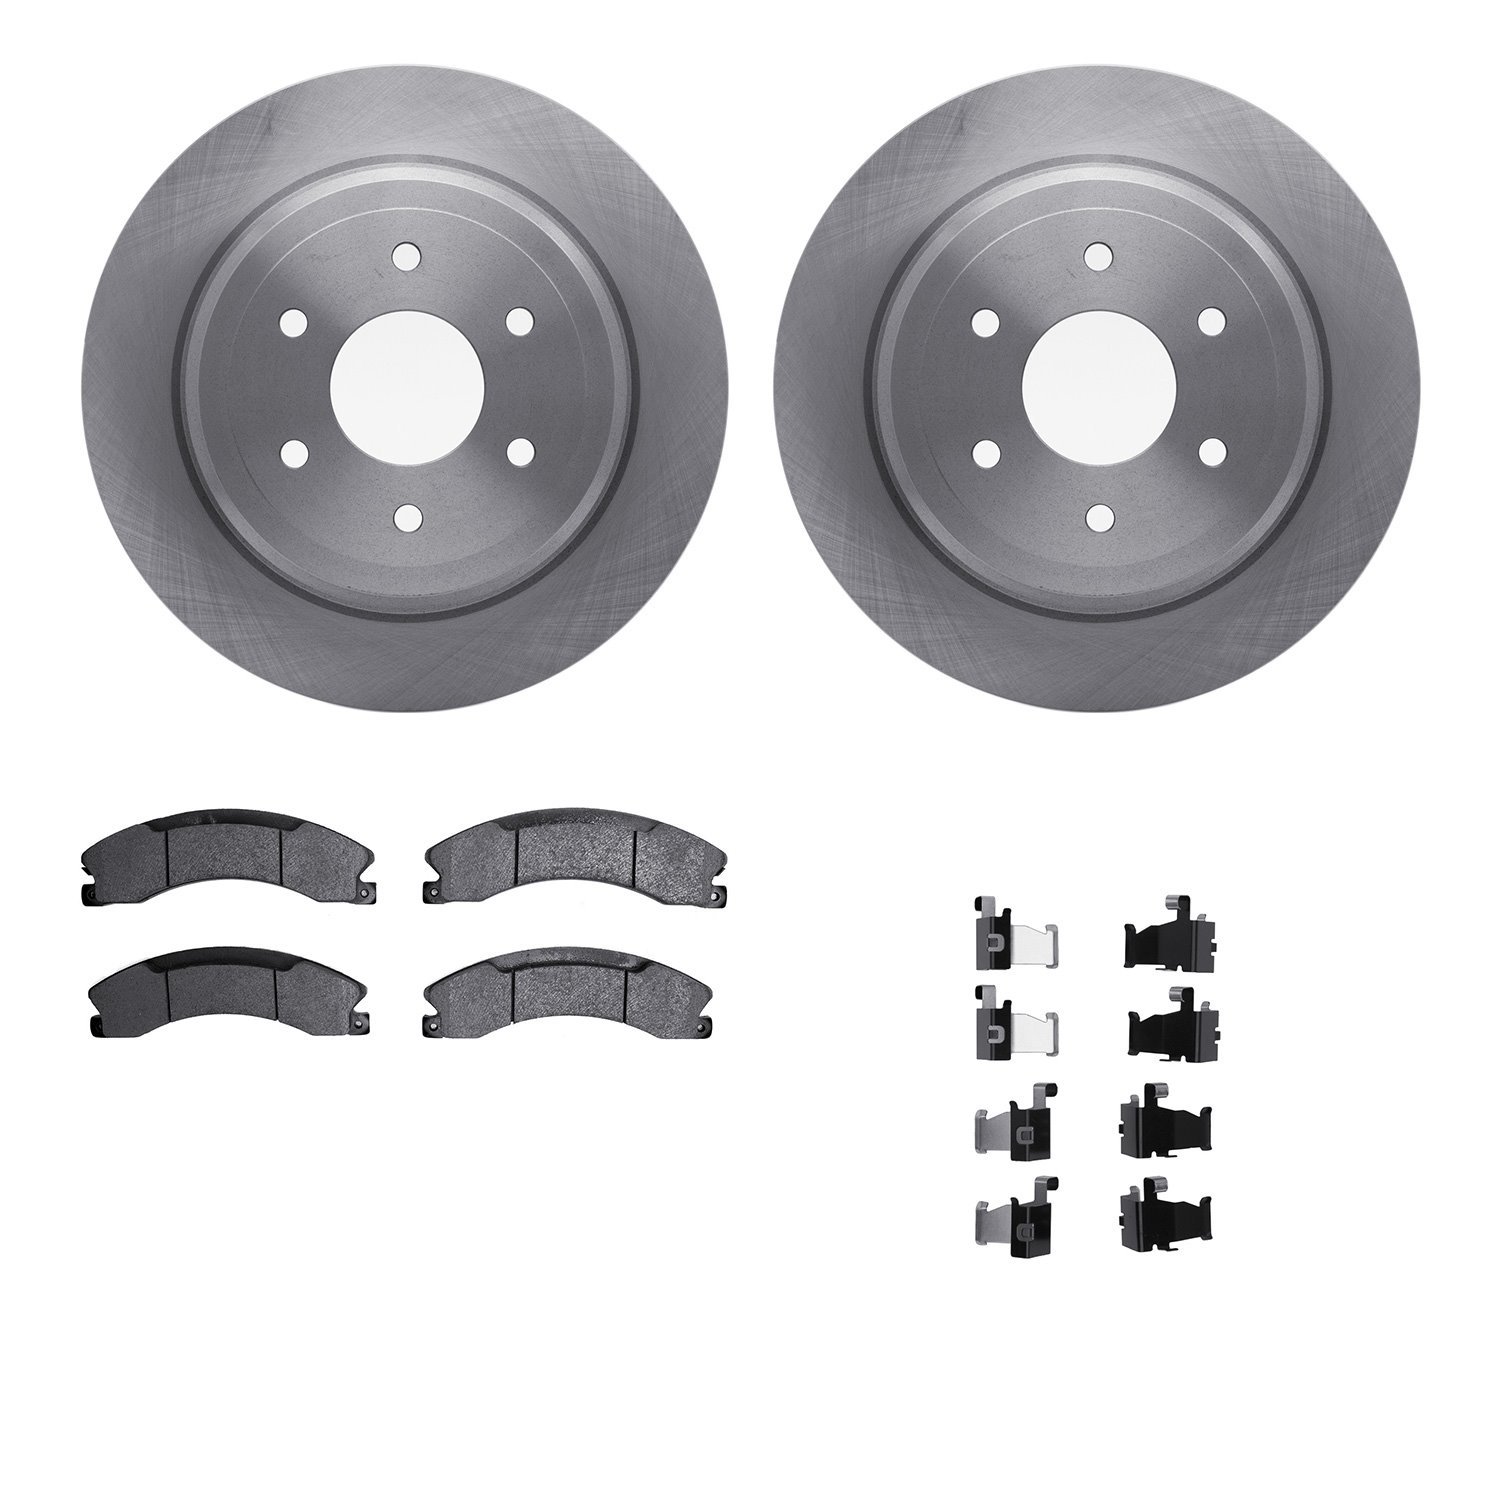 6312-67123 Brake Rotors with 3000-Series Ceramic Brake Pads Kit with Hardware, Fits Select Infiniti/Nissan, Position: Rear